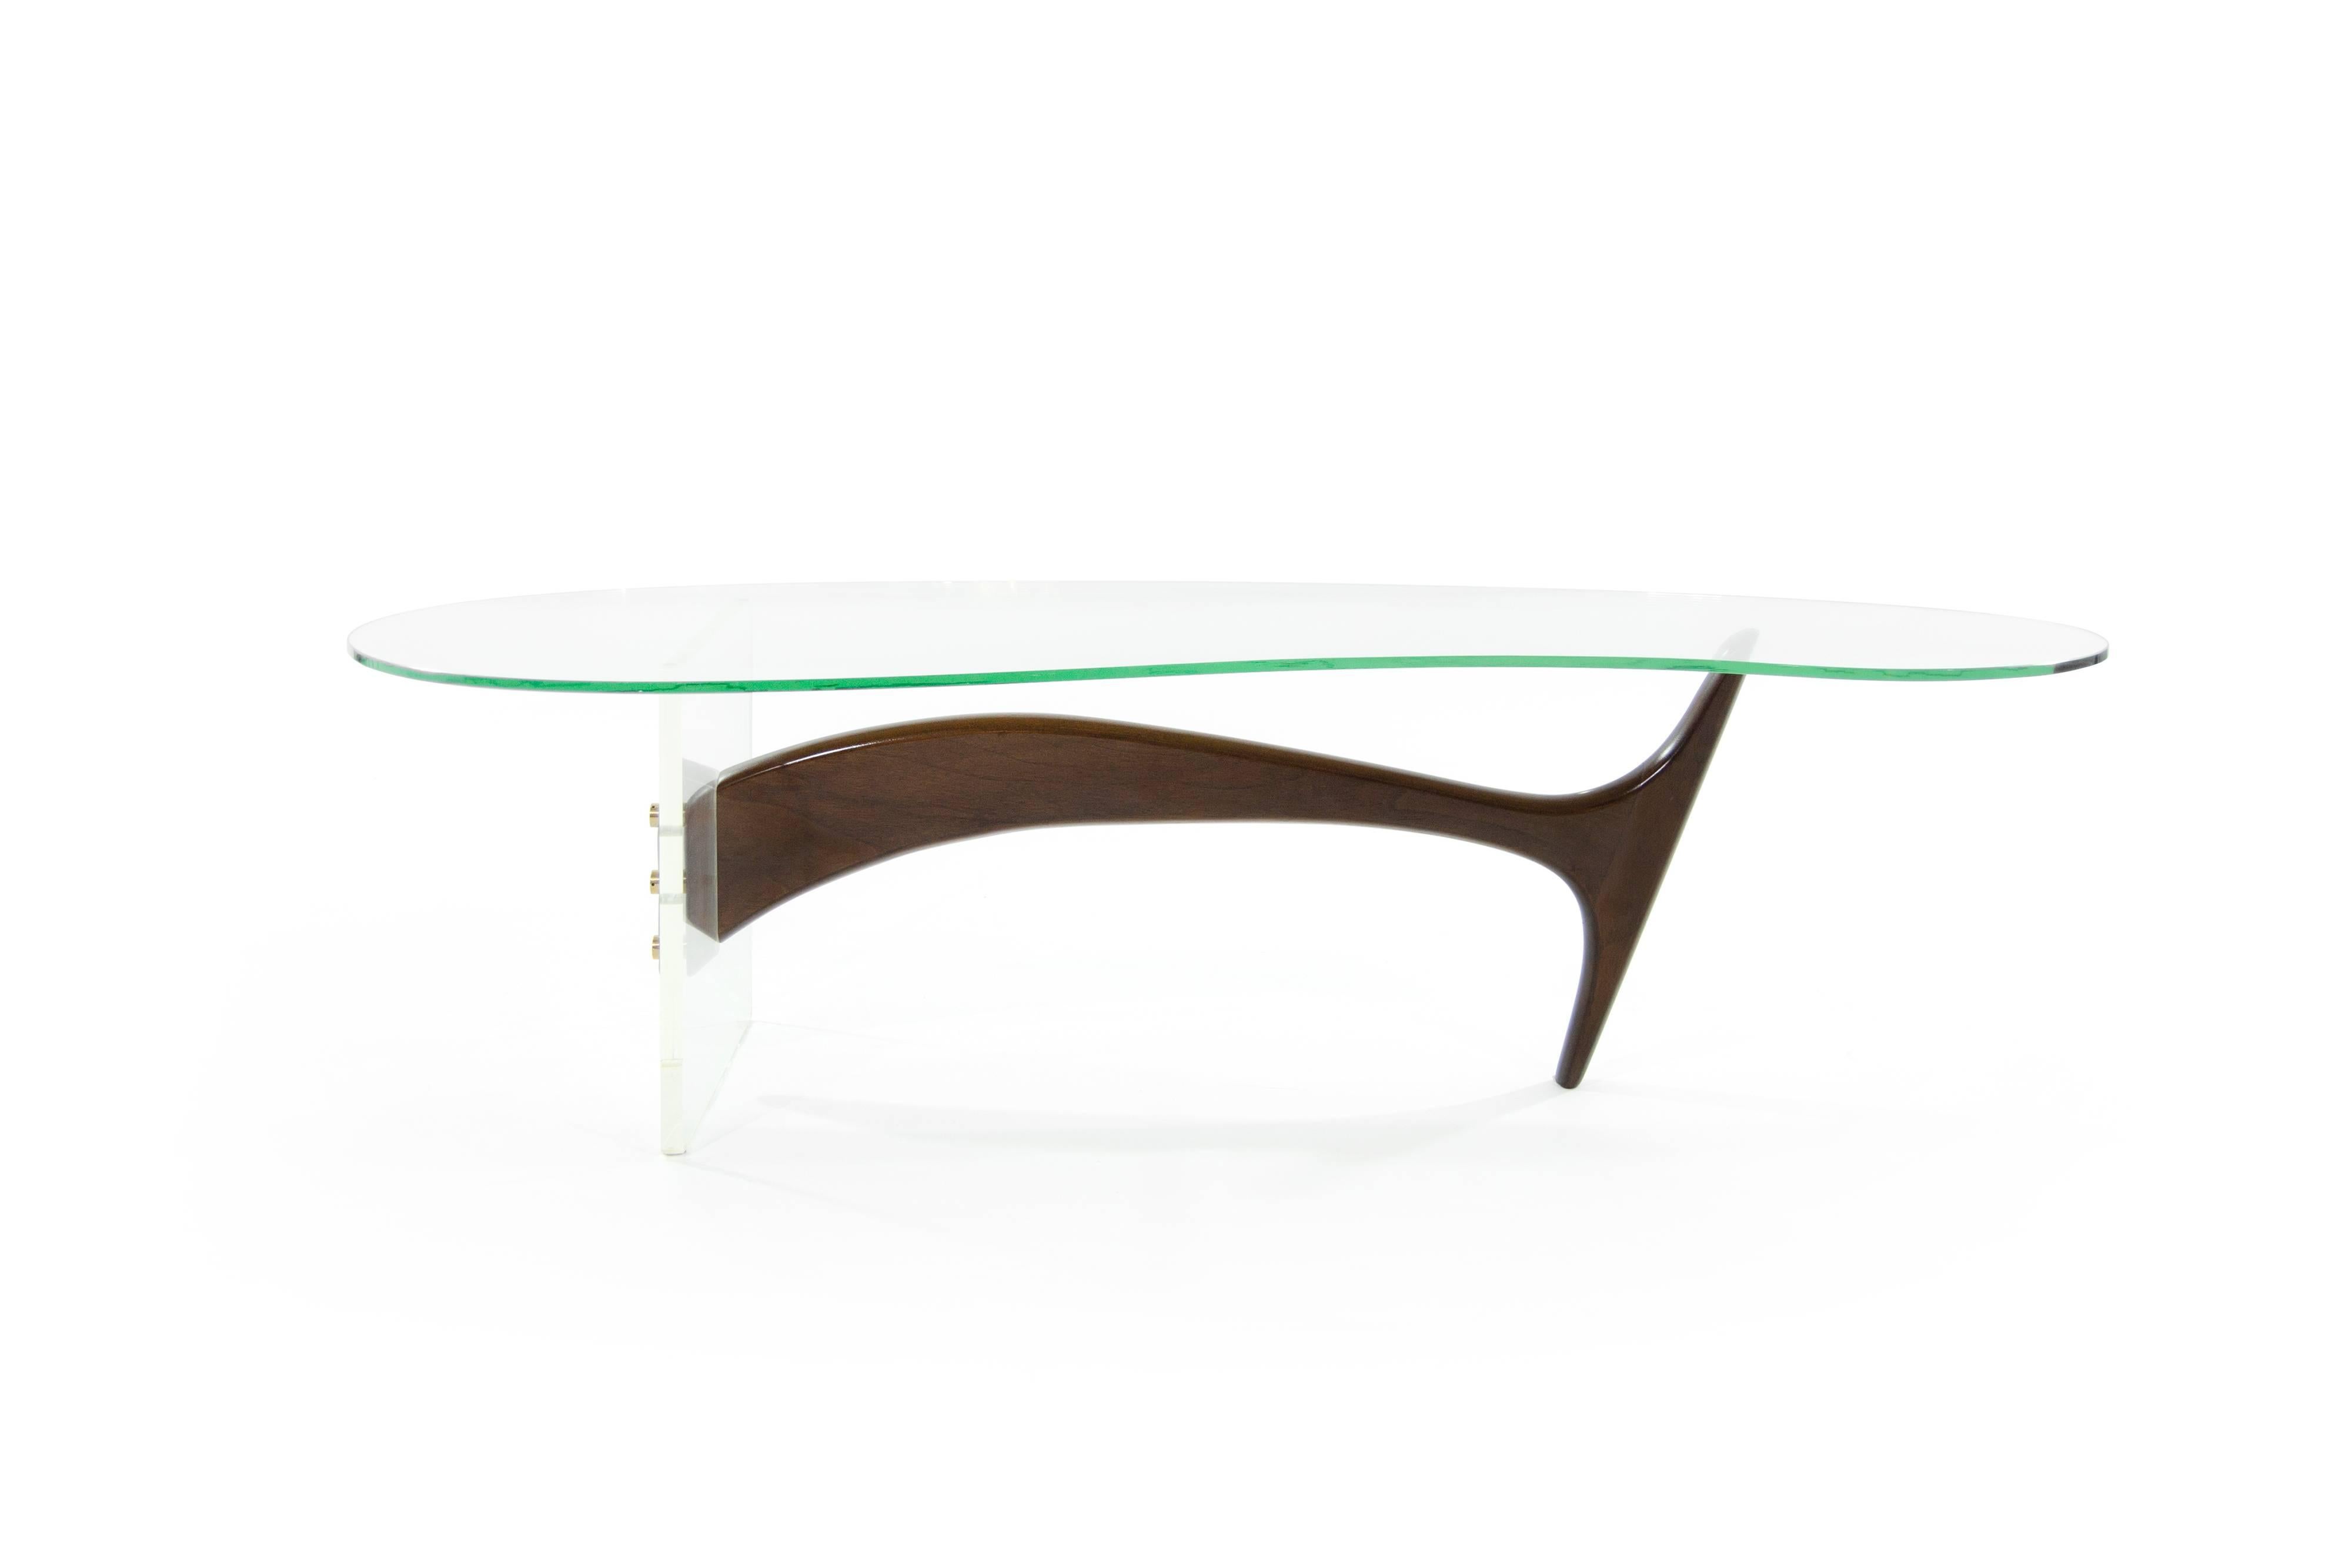 A phenomenal sculptural coffee table featuring a biomorphic 